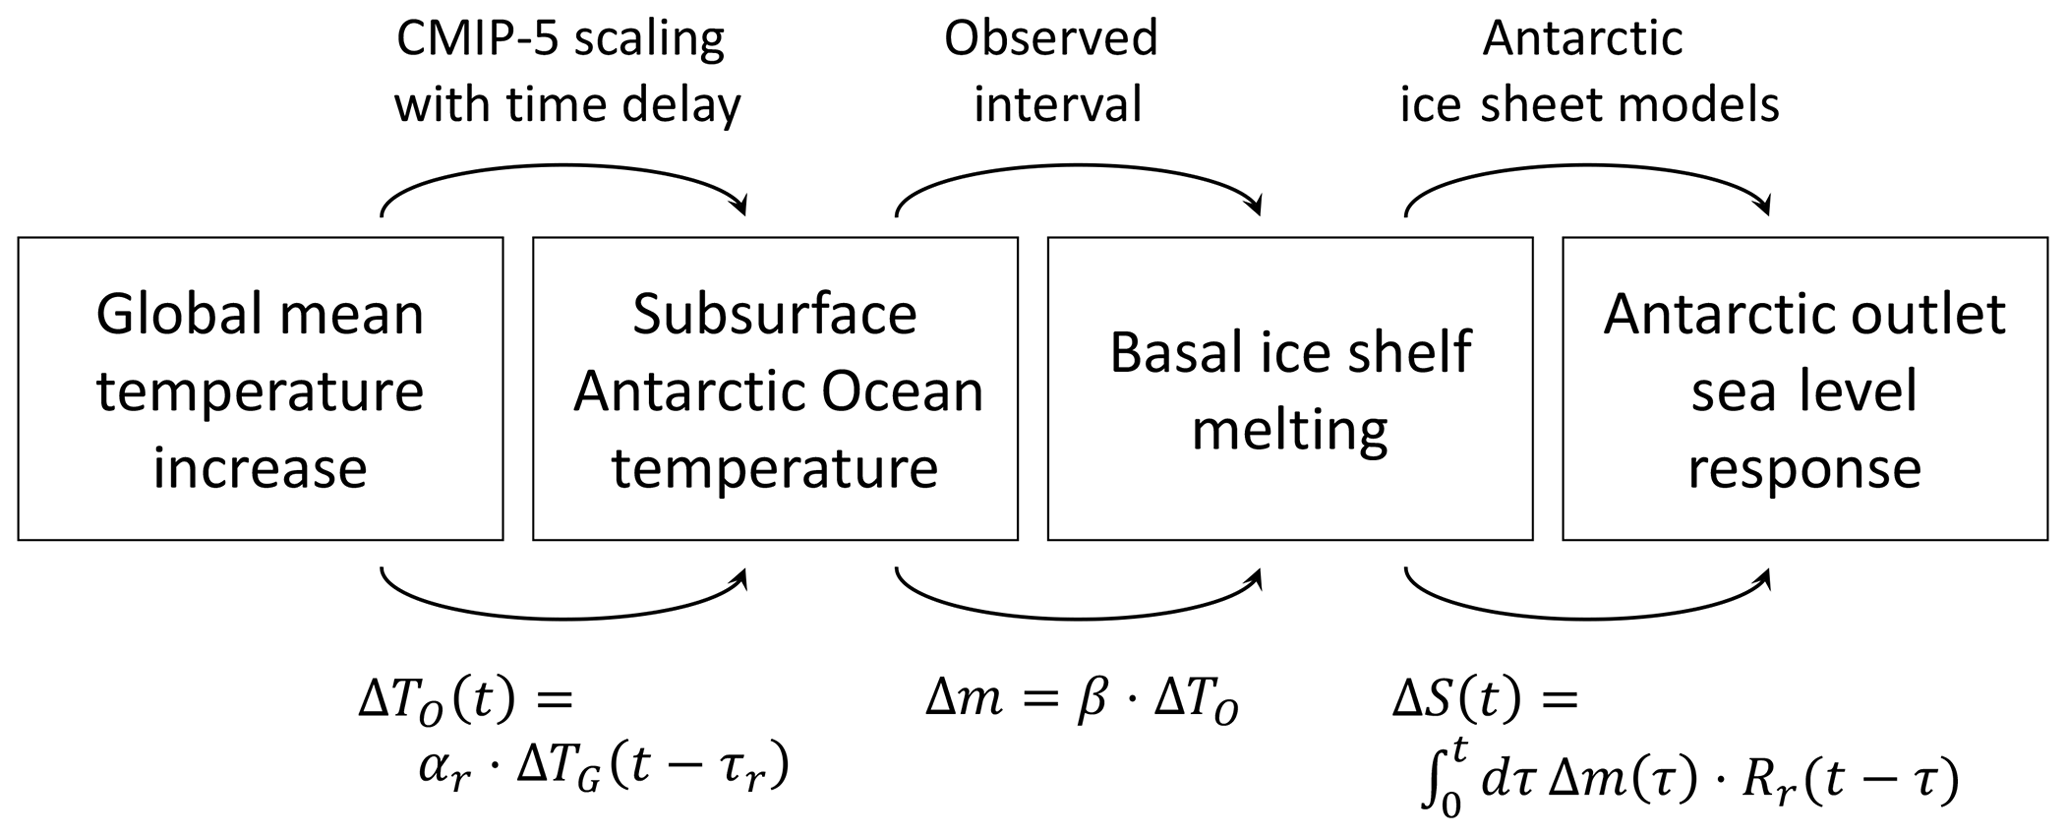 Esd Projecting Antarctica S Contribution To Future Sea Level Rise From Basal Ice Shelf Melt Using Linear Response Functions Of 16 Ice Sheet Models Larmip 2